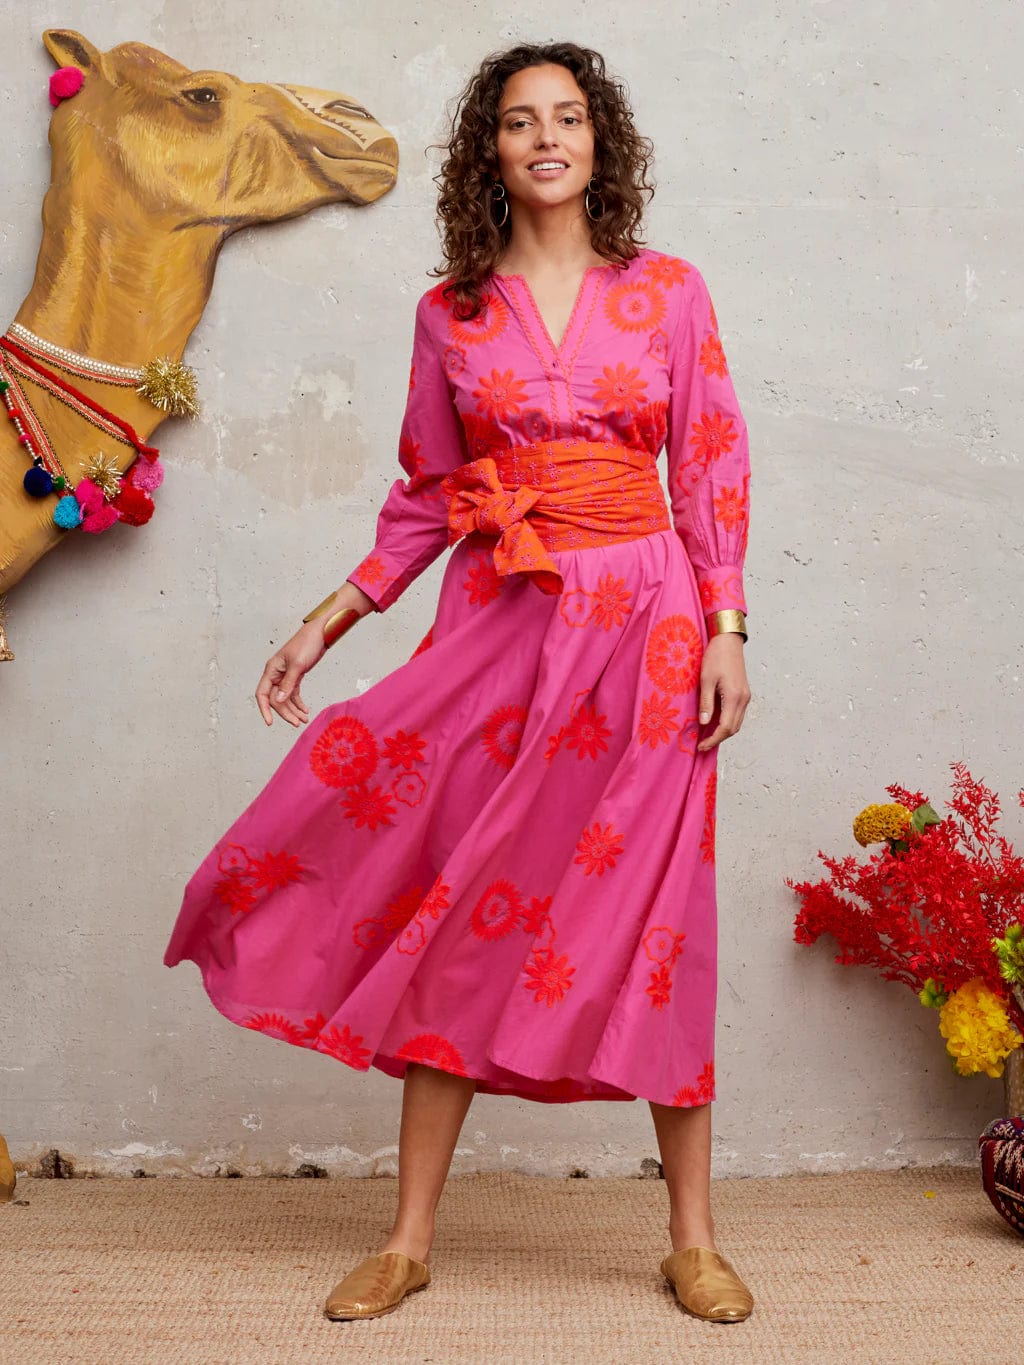 Nimo with Love Azurite Dress Orange Flower Embroidery on Pink